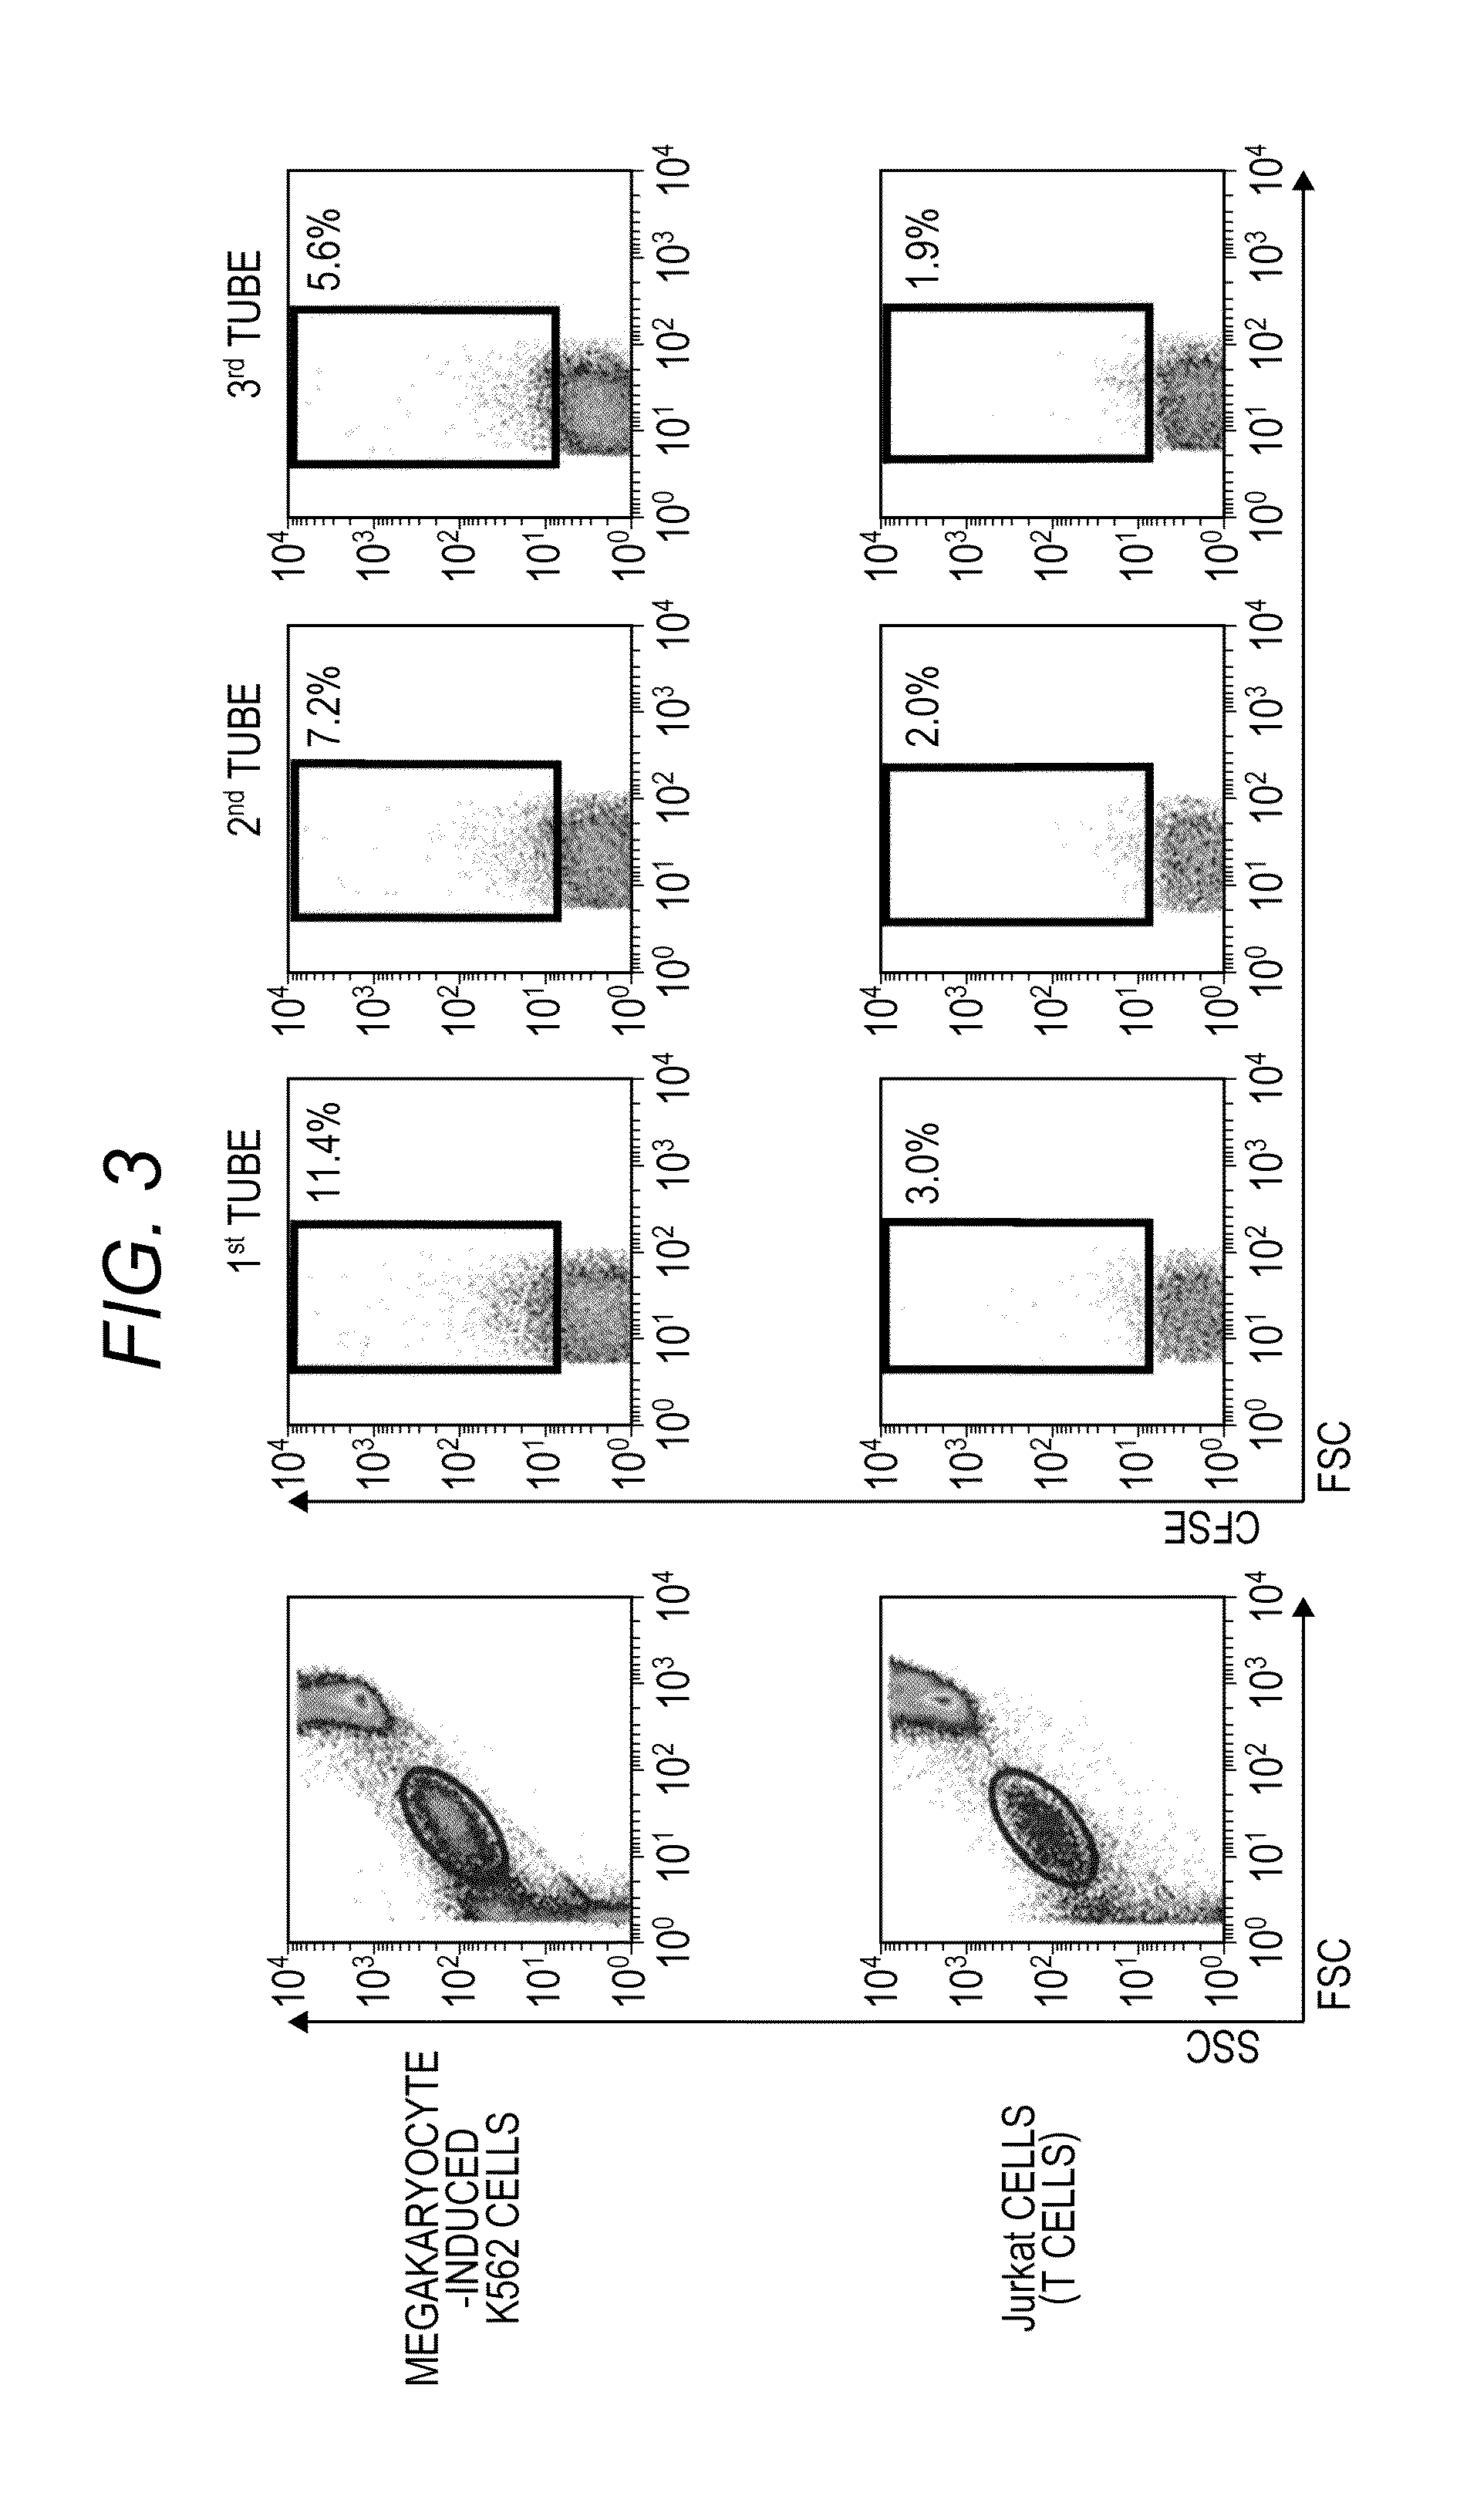 Method for obtaining differentiated cells and /or differentiated cell products from undifferentiated cell and a method of perfusion culture